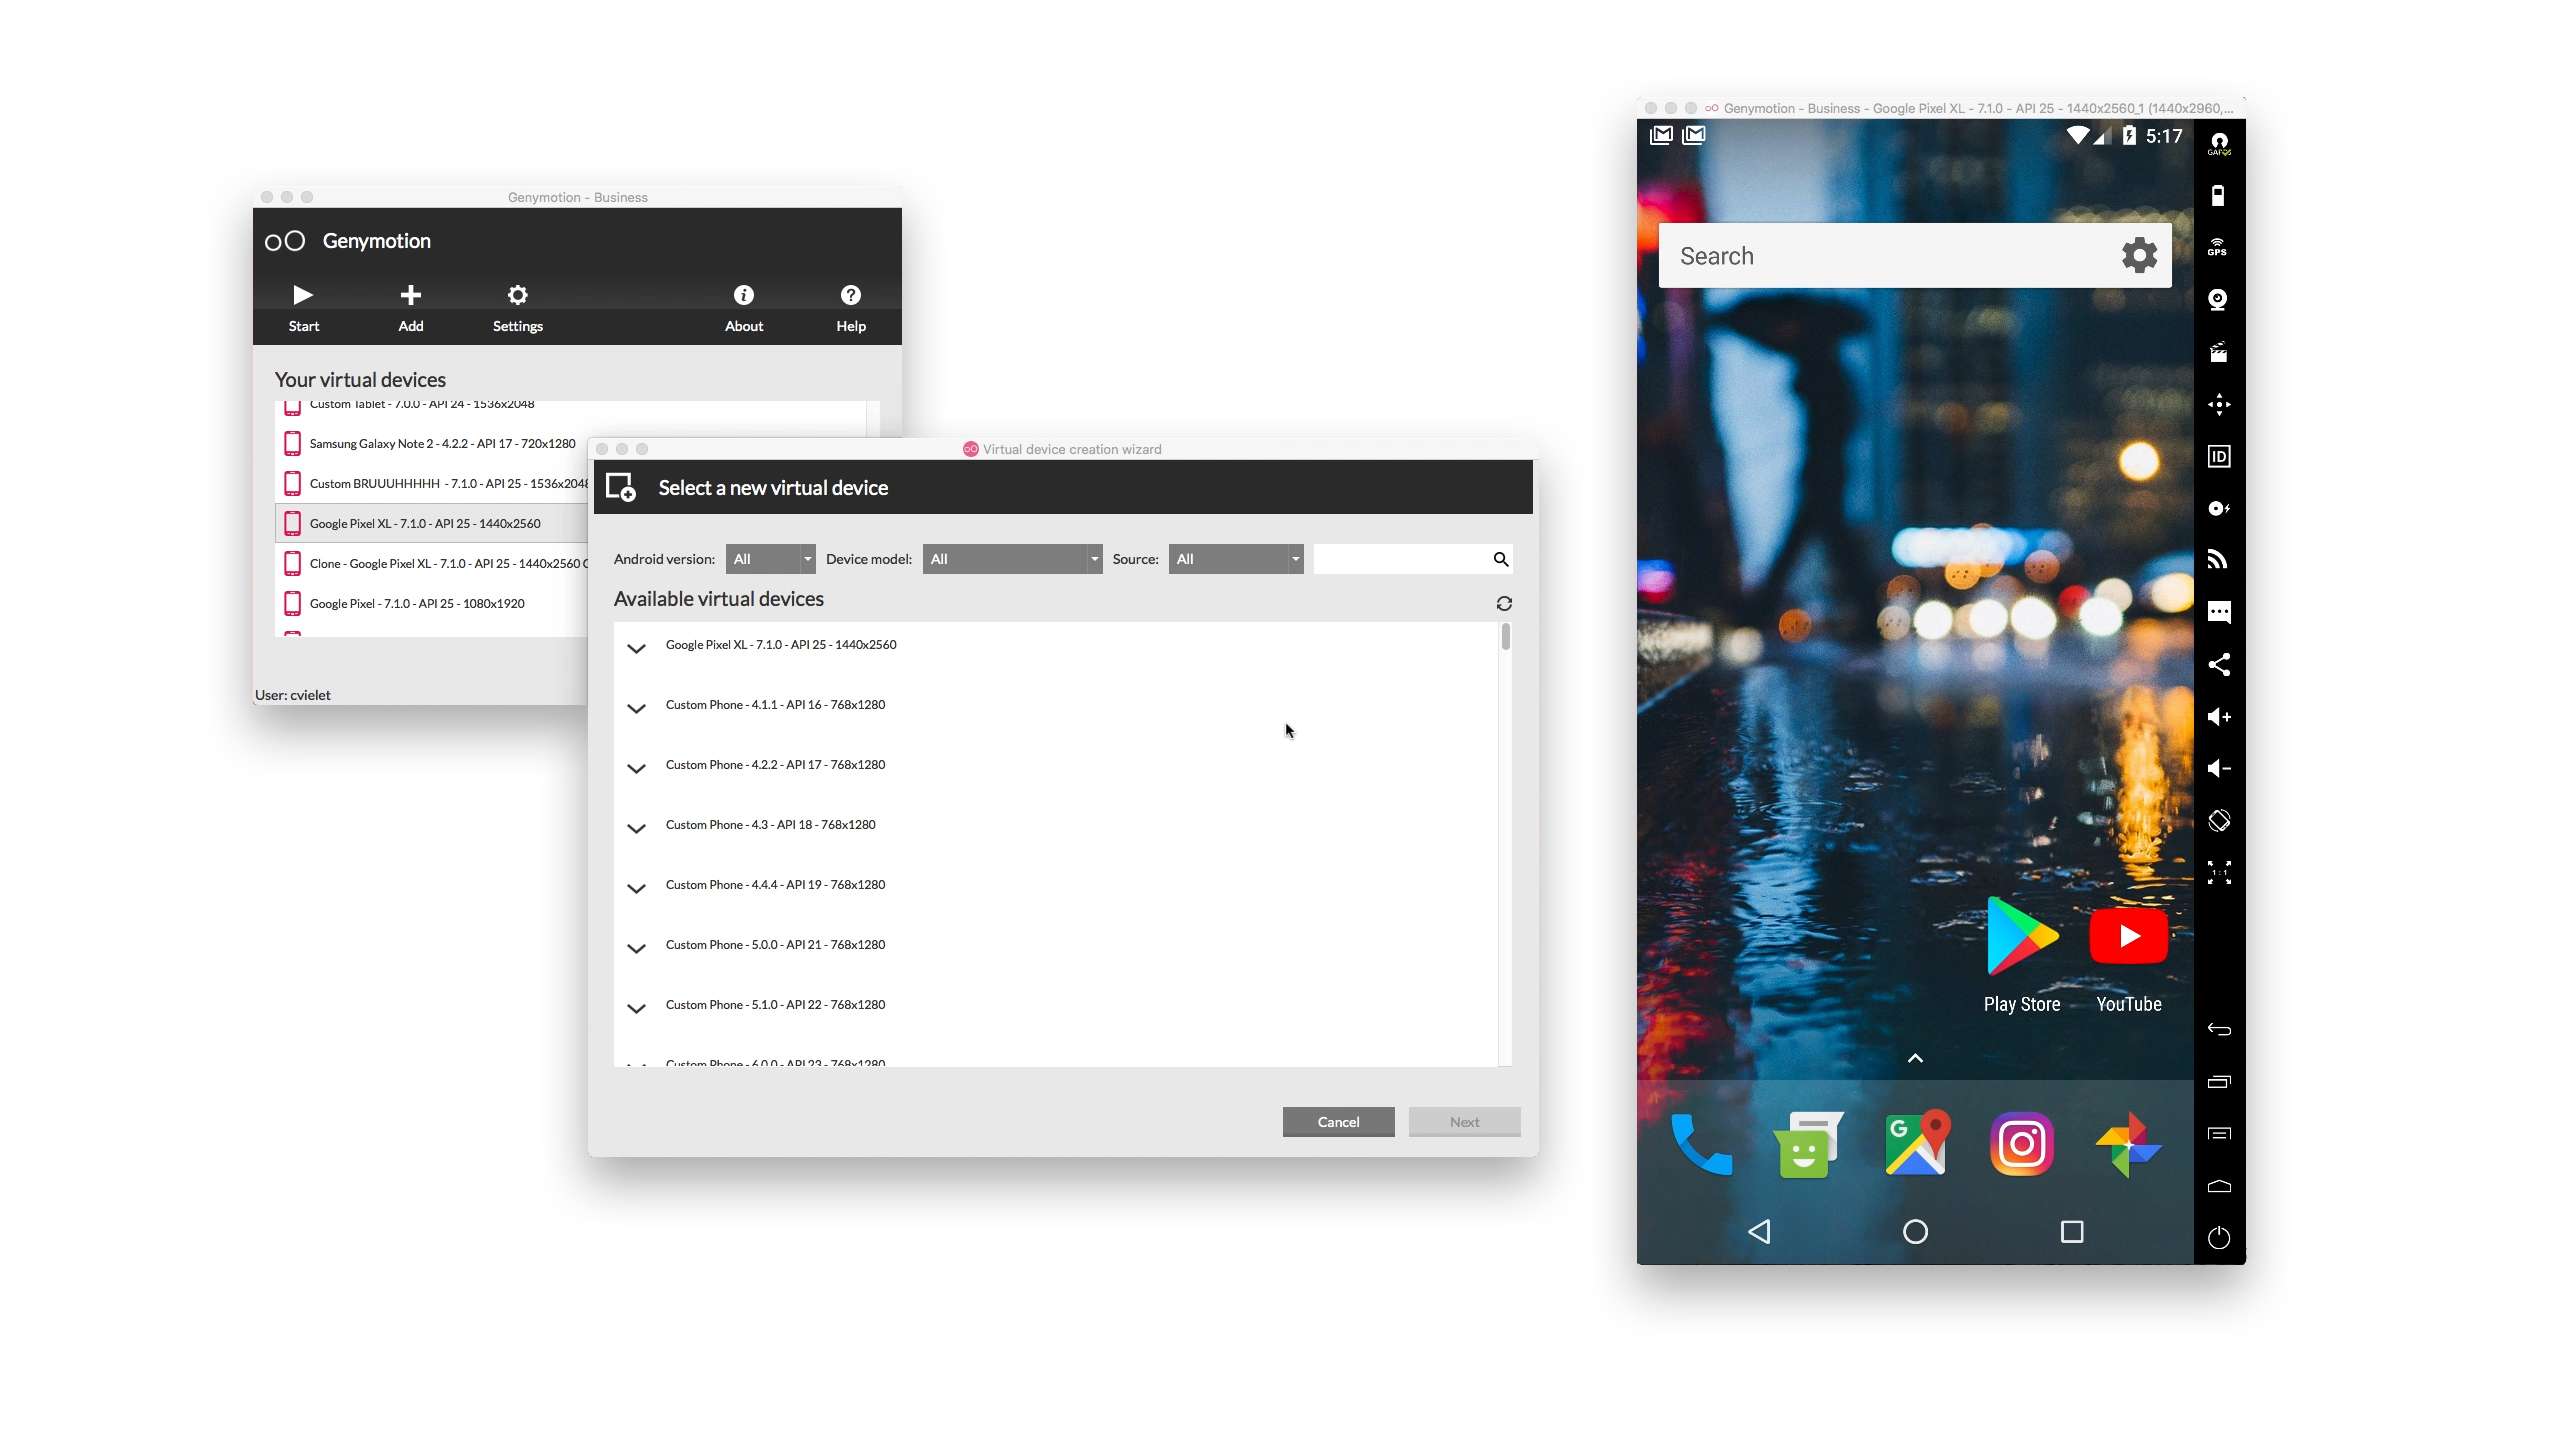 android emulator for mac 2015